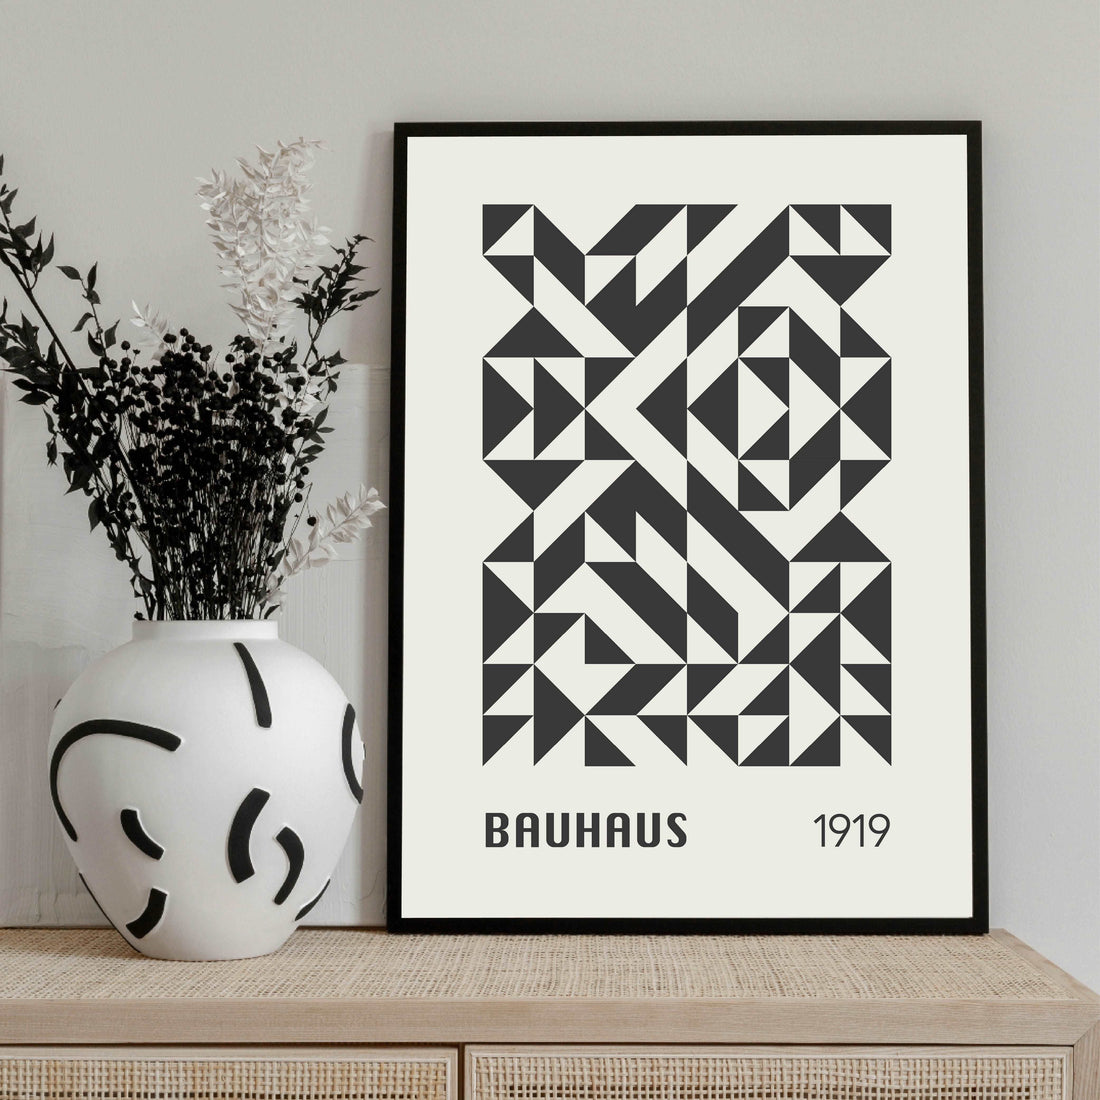 Bauhaus Poster 1919 Edges - Add sophistication to your home